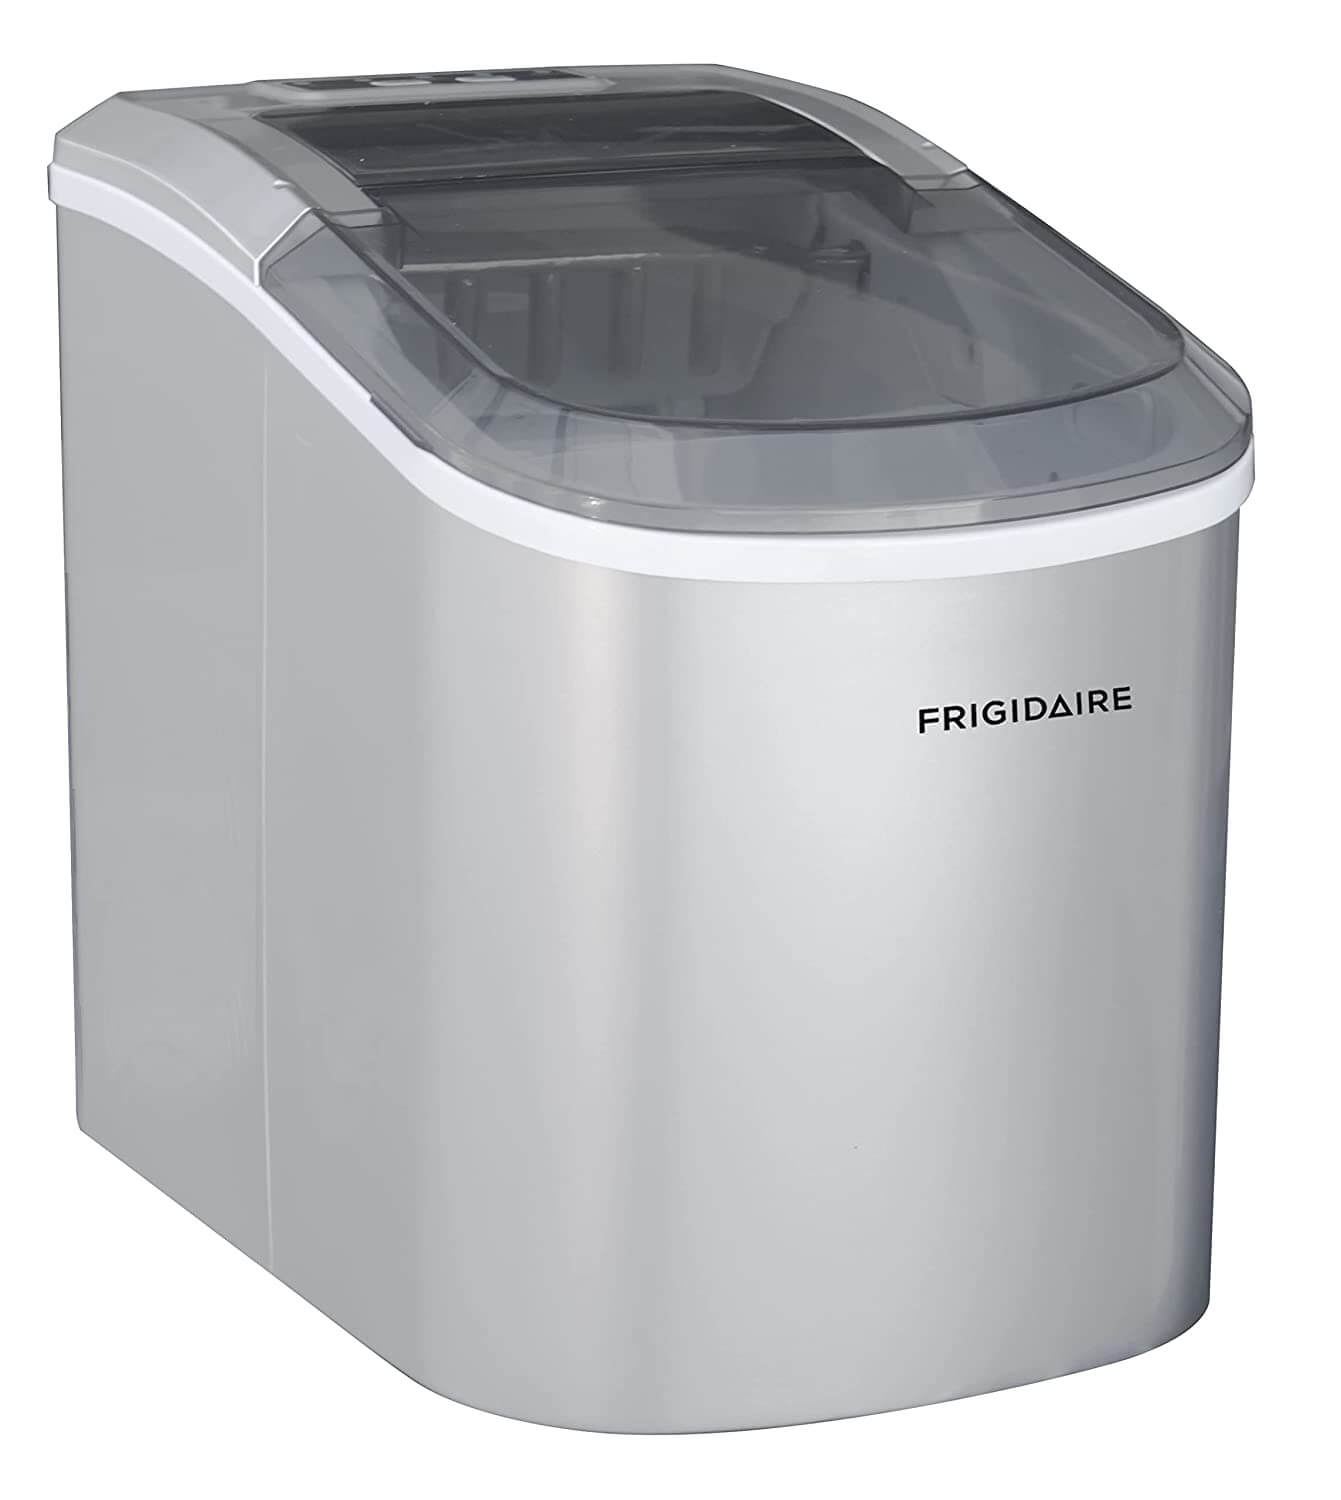 Frigidaire EFIC189 Compact Nugget Ice Maker